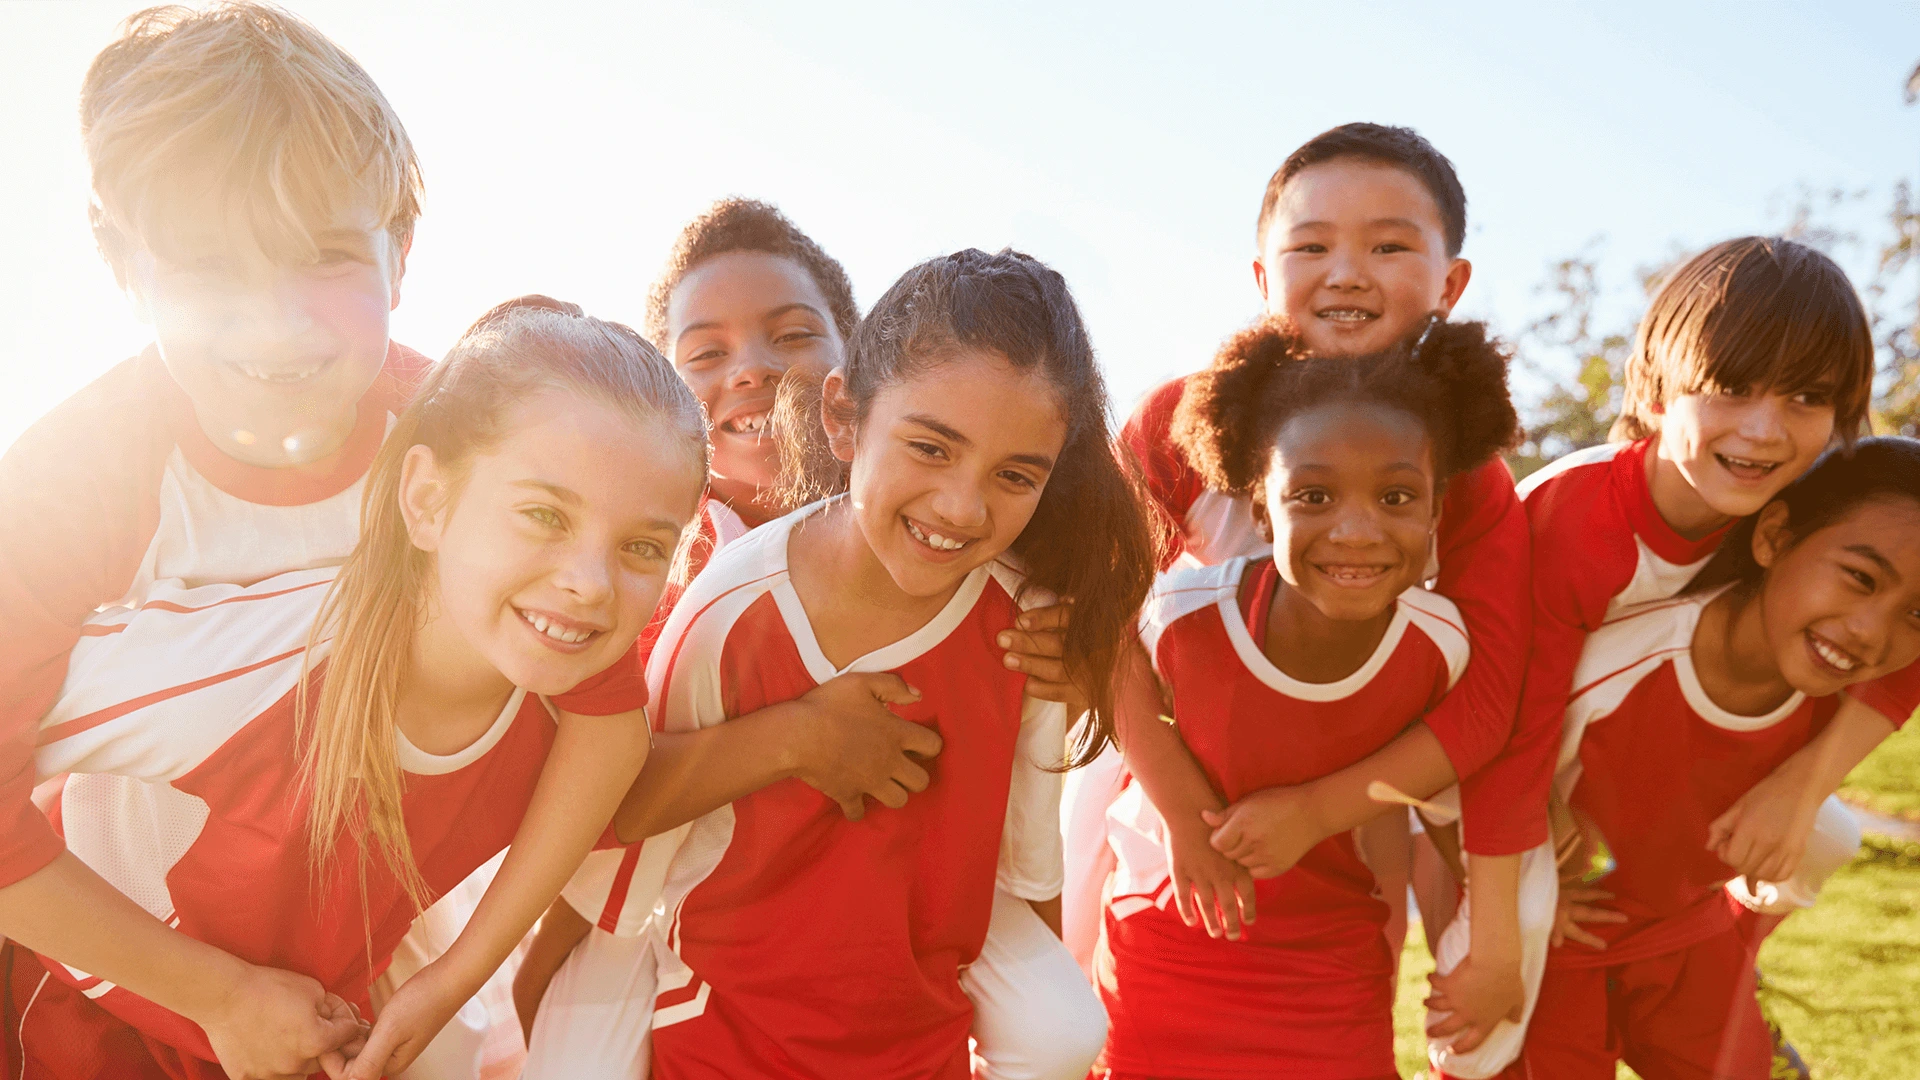 A group of diverse children in red sports uniforms smiling and embracing each other in a sunny outdoor setting.